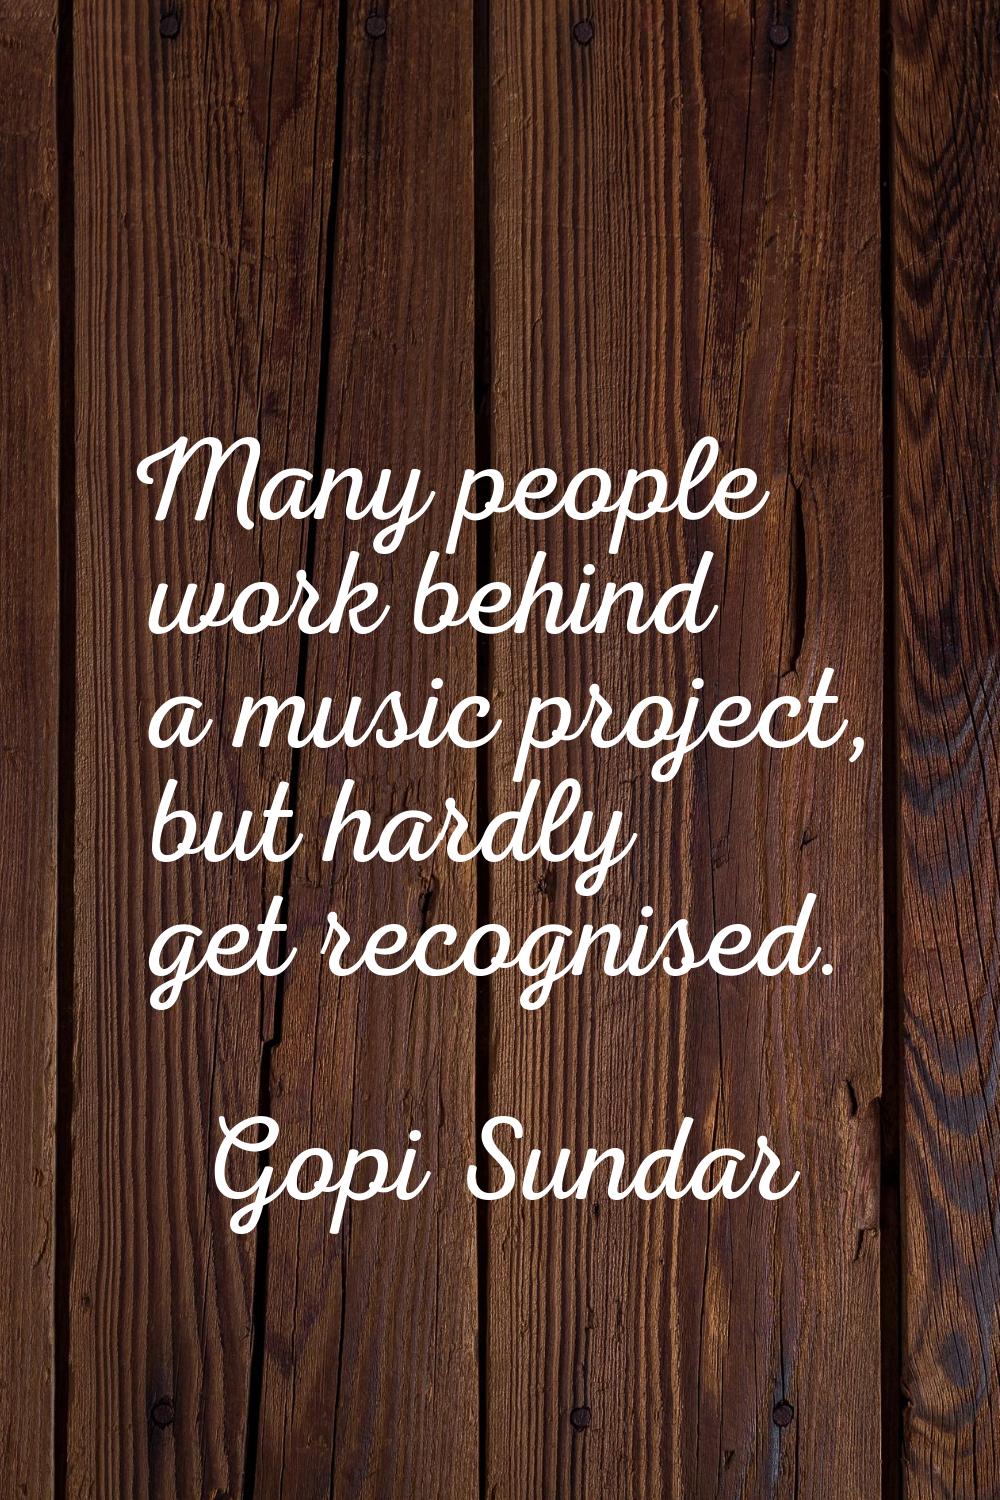 Many people work behind a music project, but hardly get recognised.